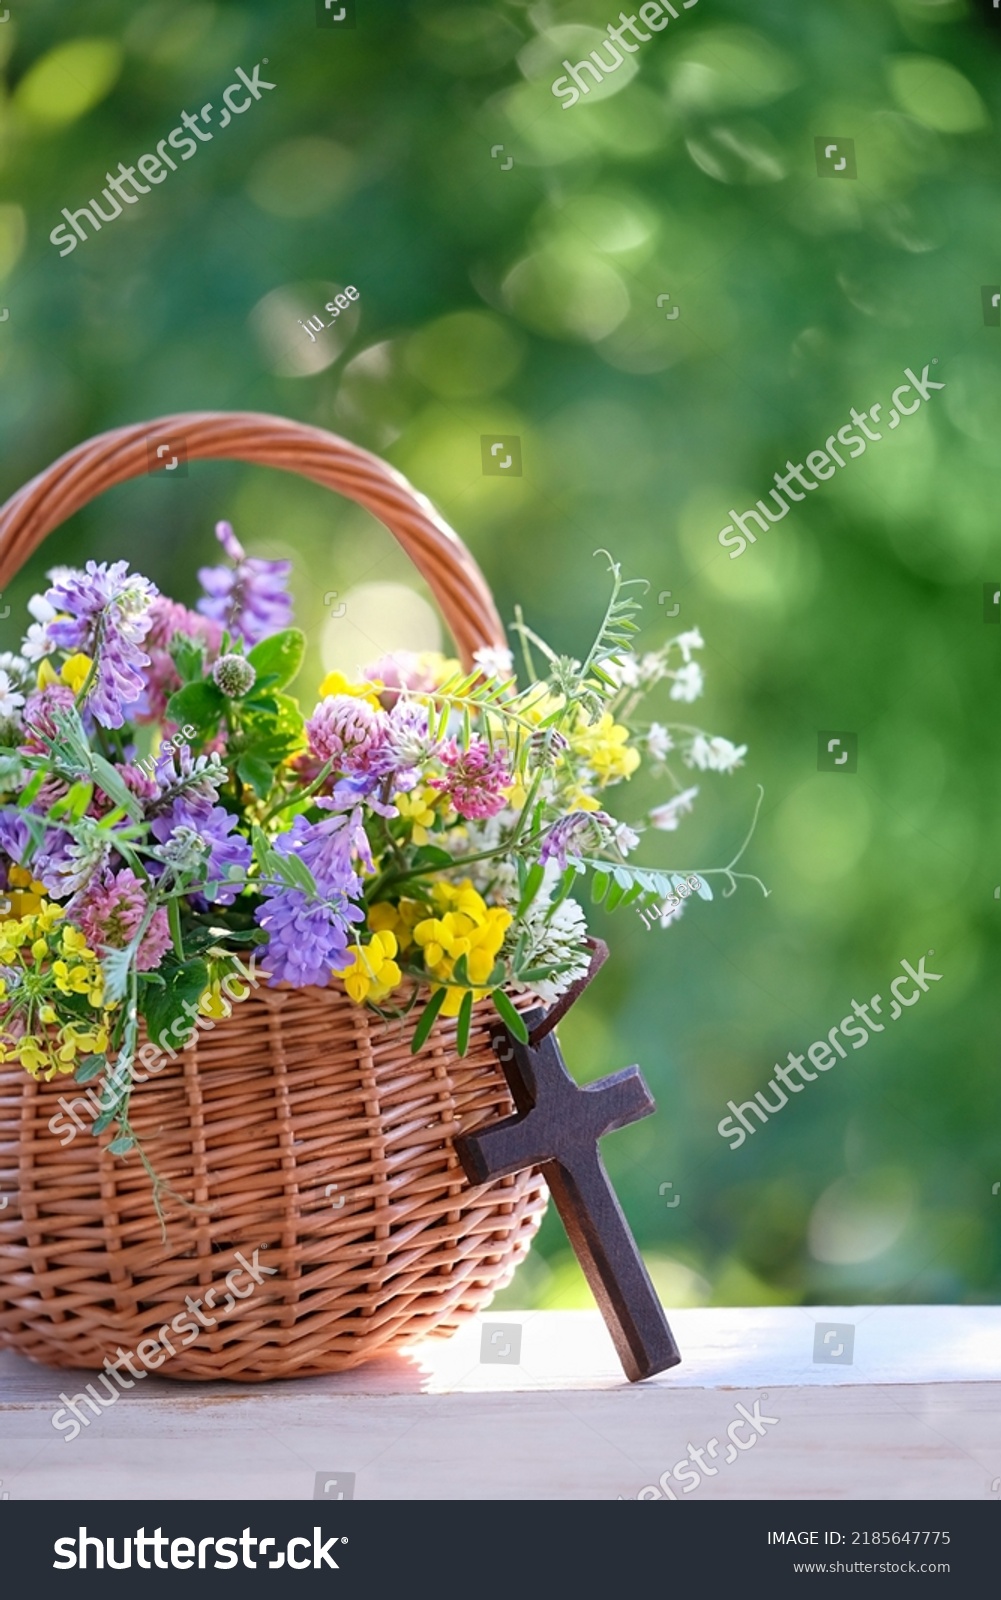 Christian cross and meadow flowers in wicker basket on table, natural background. Herbal consecration - traditional customs of August 15, day of the Assumption of Mary, know as Divine Mother of Herbs #2185647775